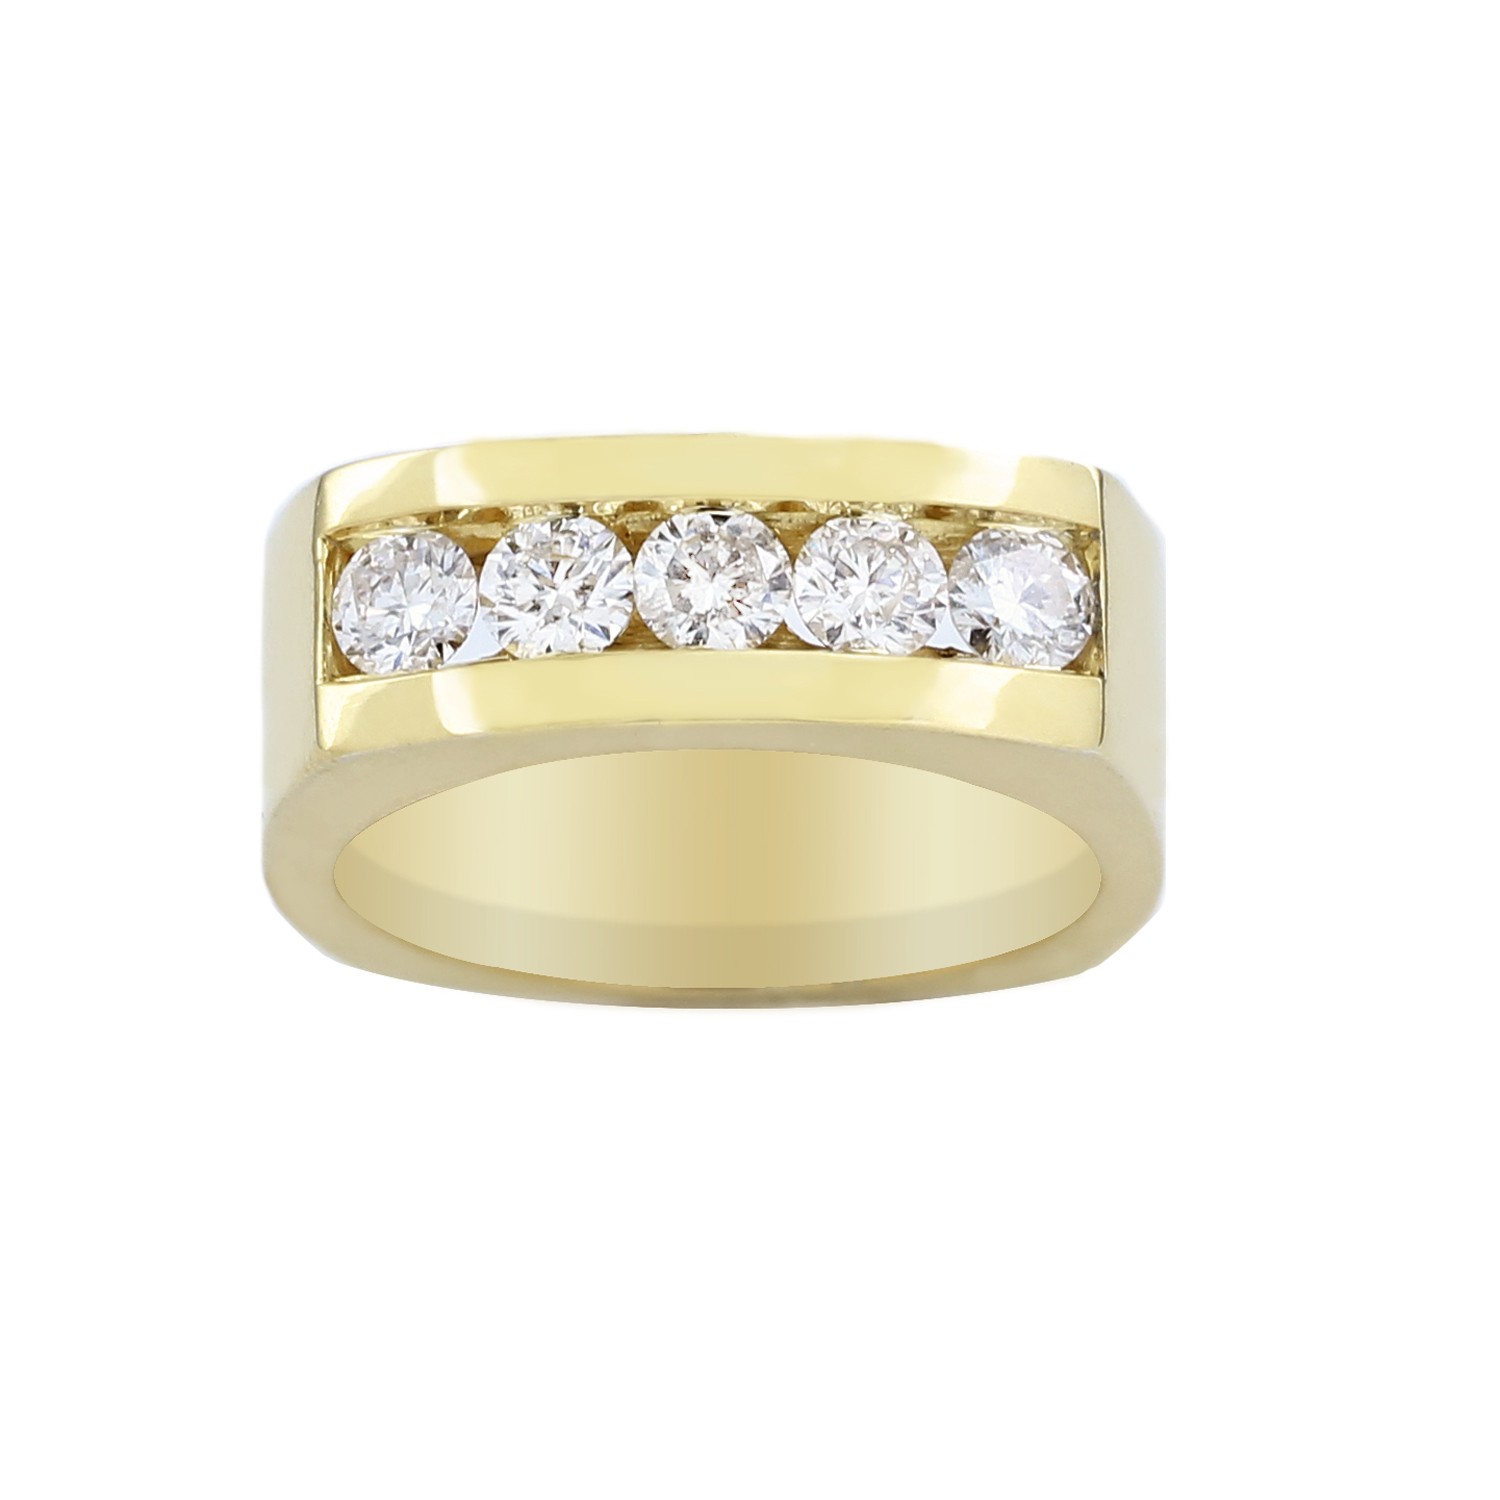 Square Shank Channel Set Diamond Ring in 10K Yellow Gold